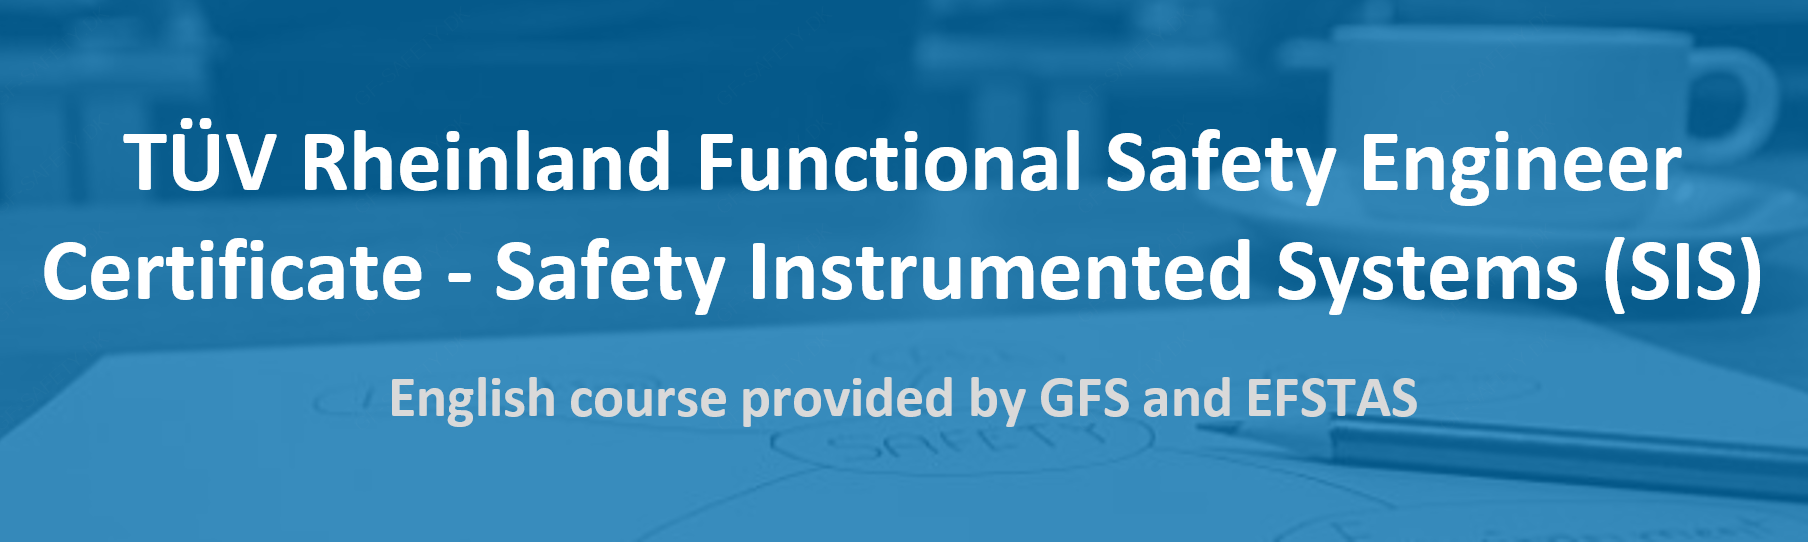 TUV Rheinland Functional Safety Engineer Certificate - Safety Instrumented Systems (SIS)